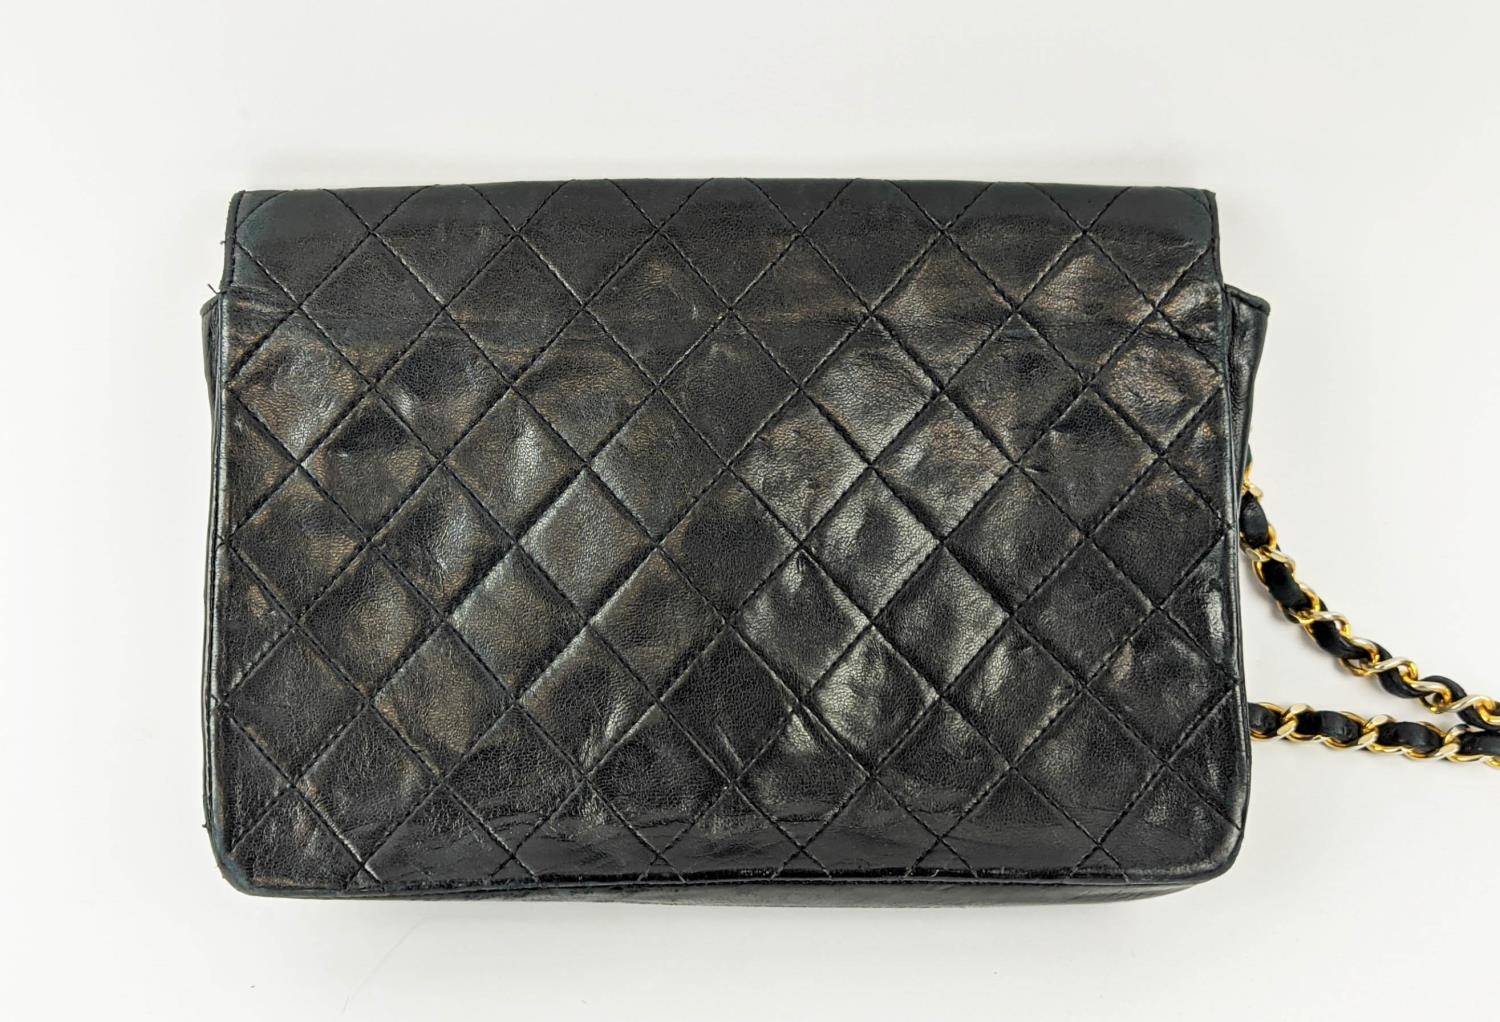 VINTAGE CHANEL FLAP BAG, round turn-lock, iconic burgundy leather lining, quilted front and back - Image 3 of 13